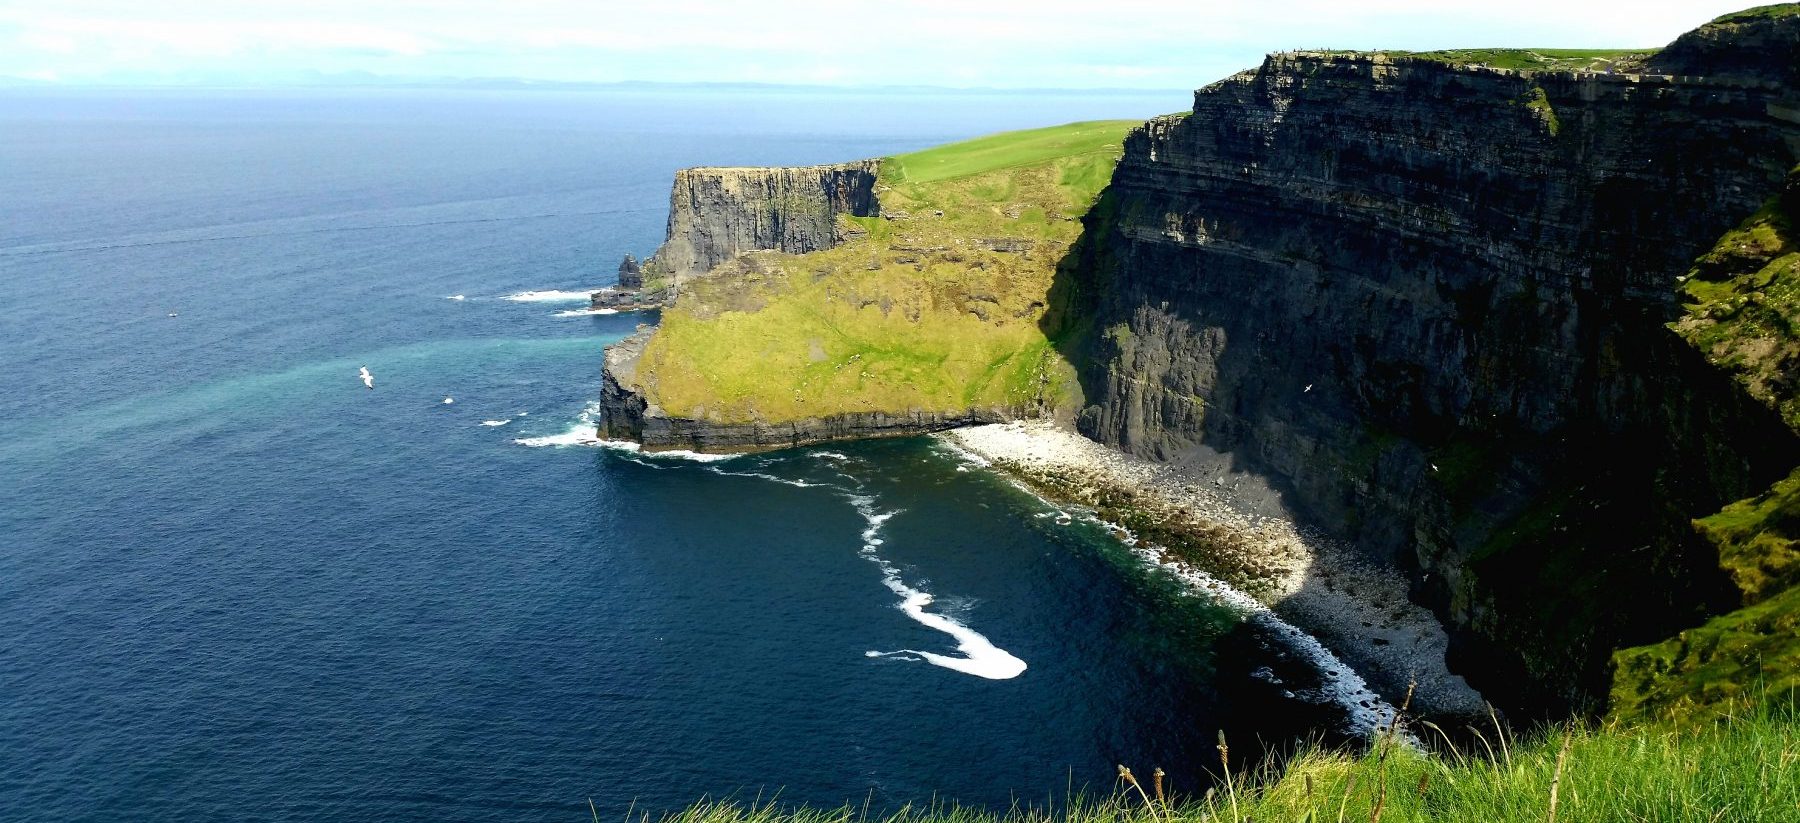 Wind slowly moving the waves to the Cliffs of Moher, Co. Clare in Ireland